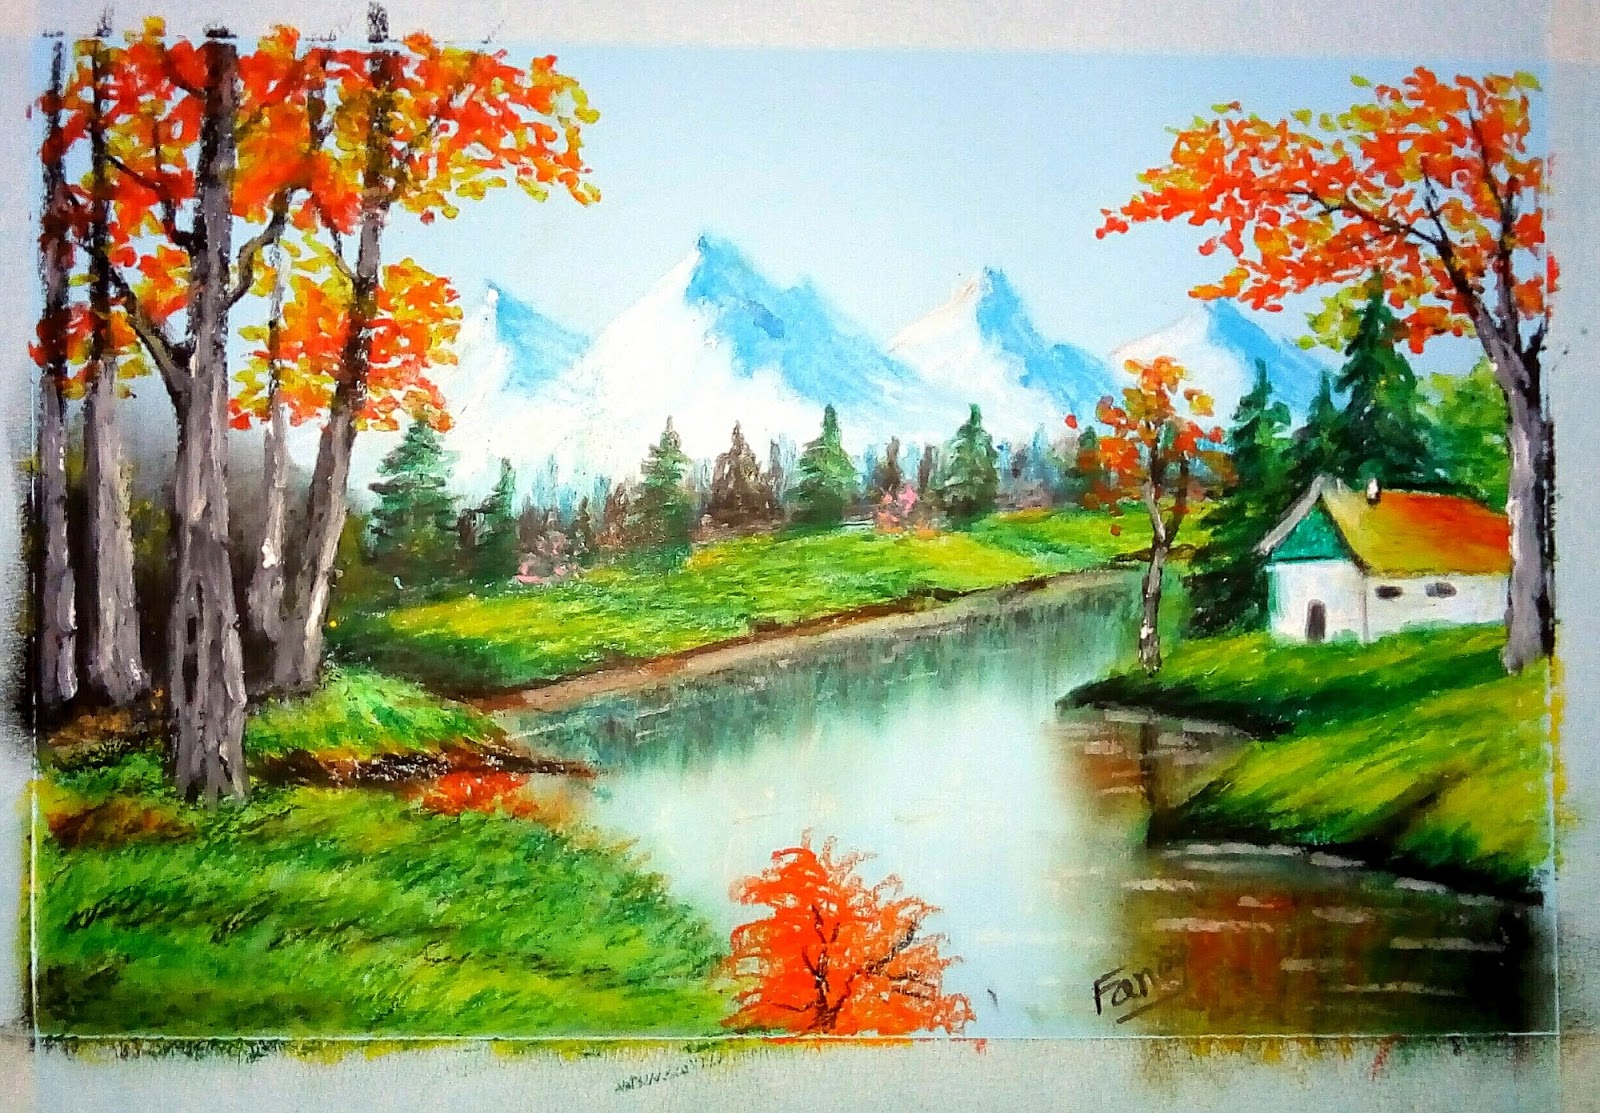 A Unique beautiful landscape drawing in 2019|| Oil pastel Drawing